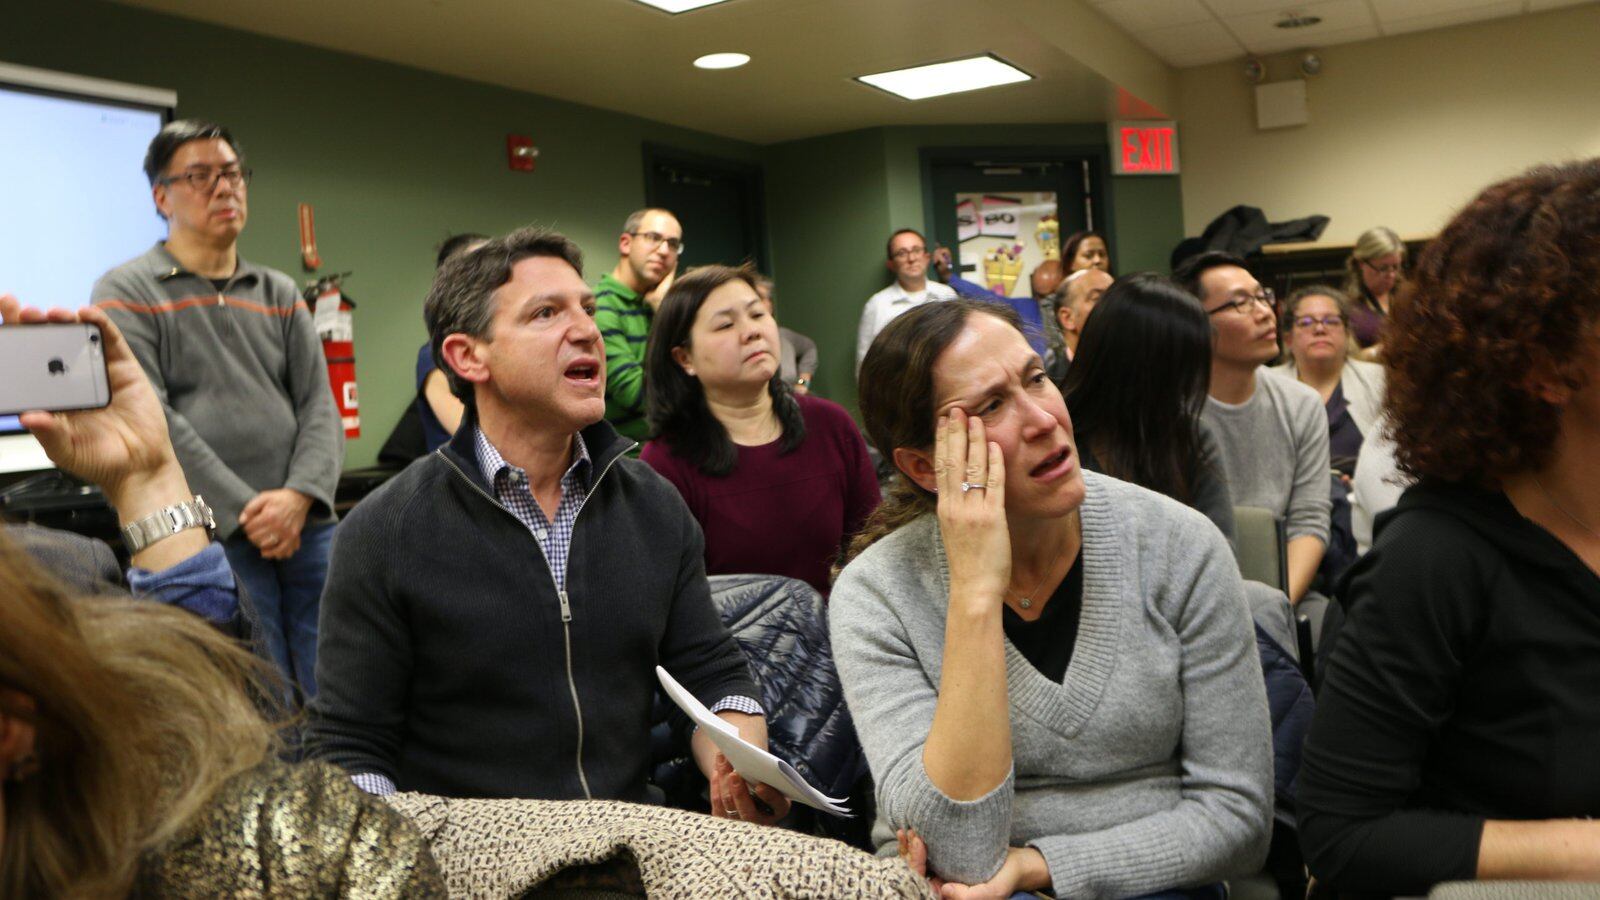 Angry parents shouted questions and concerns about middle school integration plans at a December 2019 meeting of the District 28 Community Education Council.